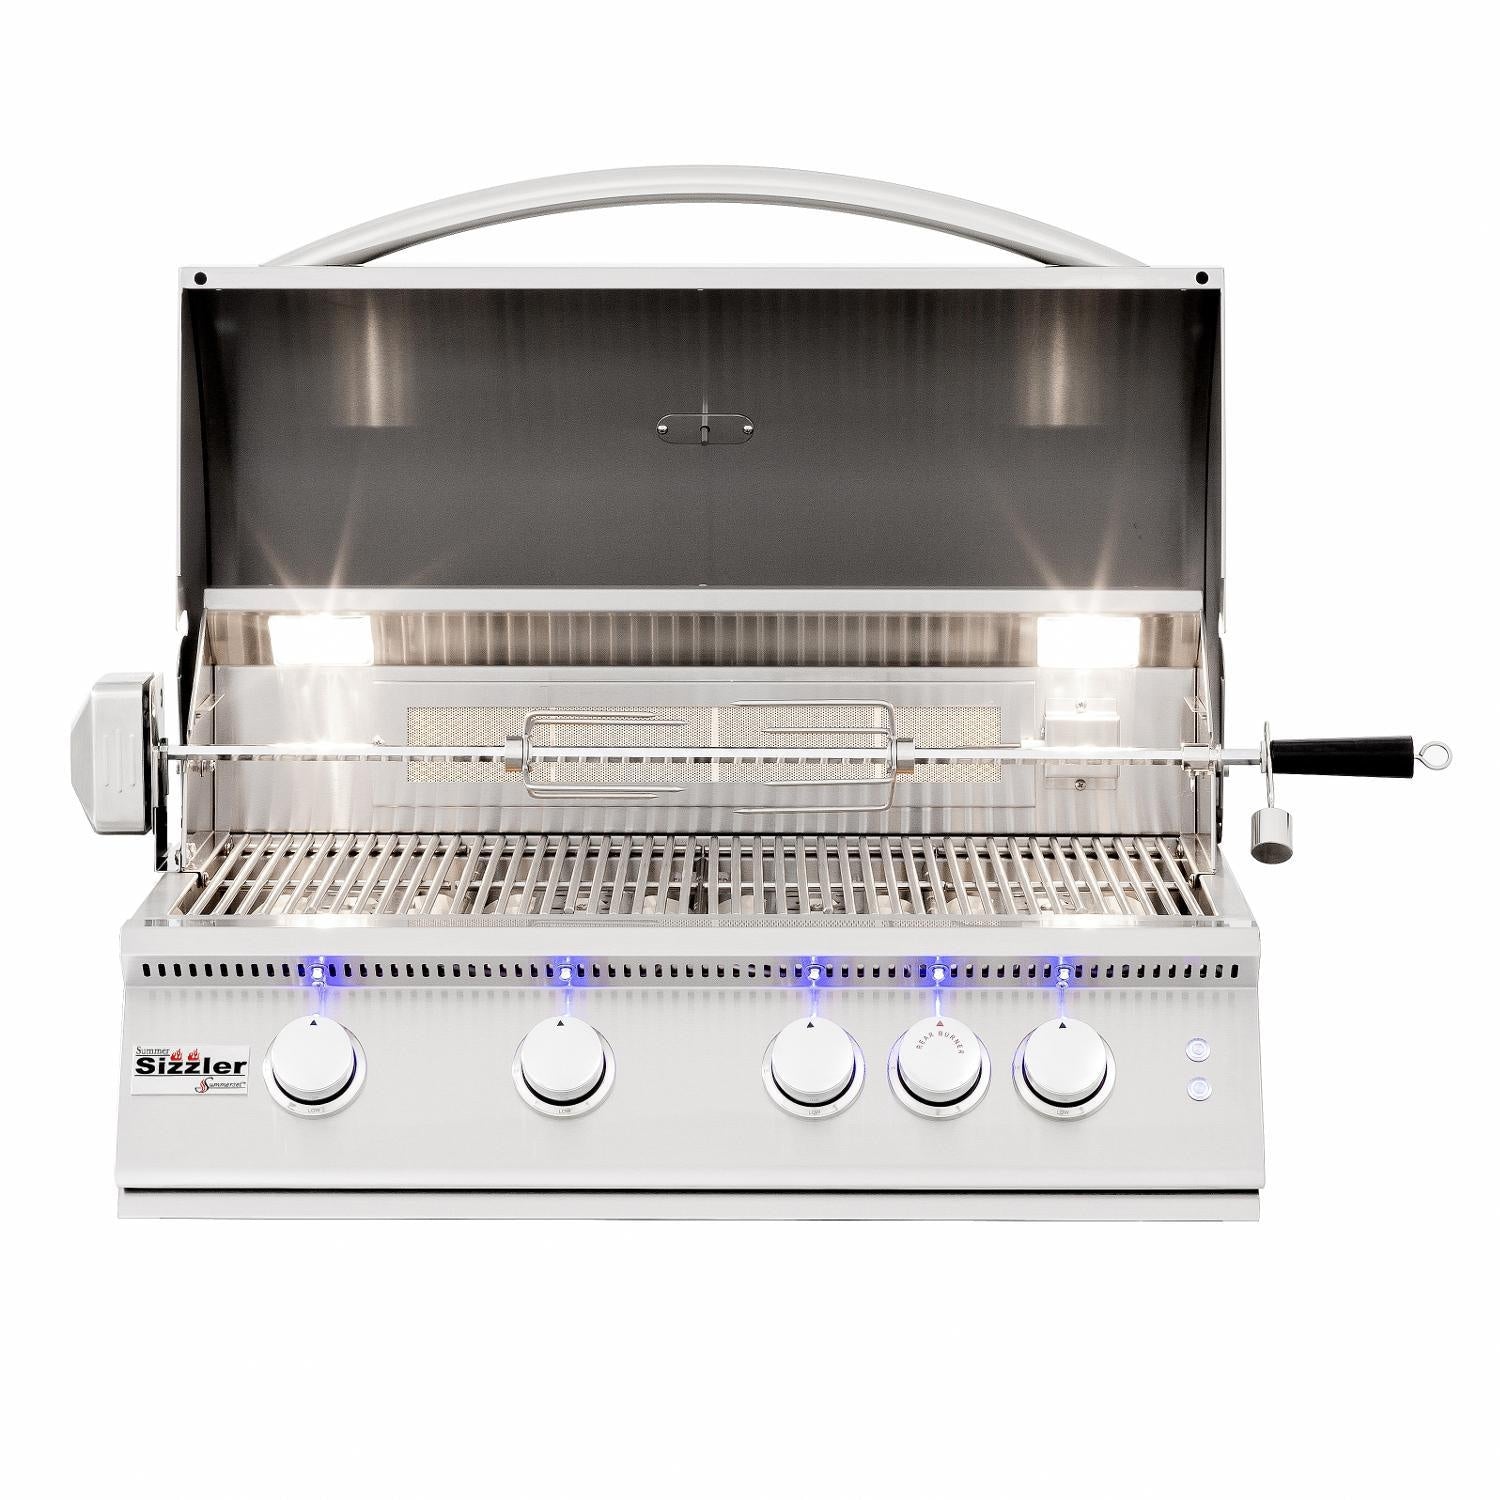 Summerset Sizzler Pro 32" Natural Gas